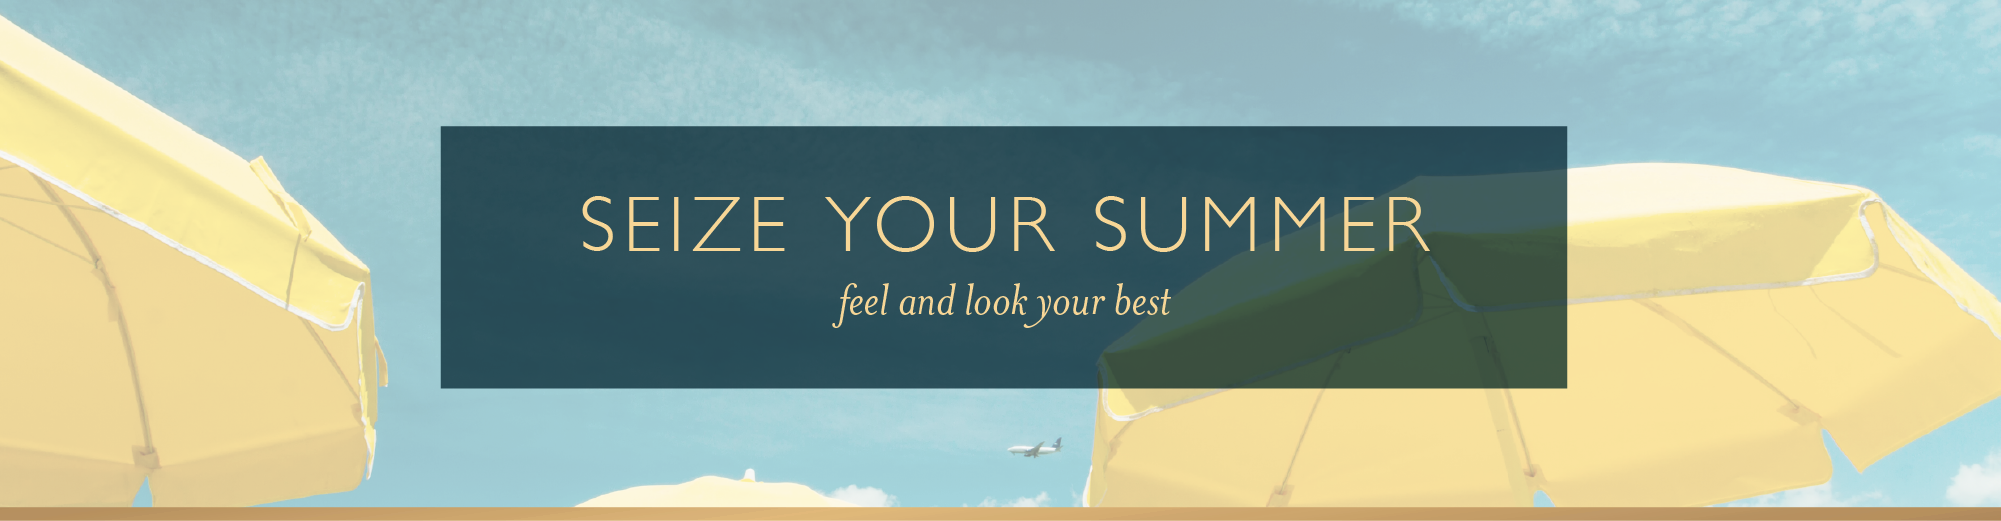 Seize your summer. Feel and look your best.